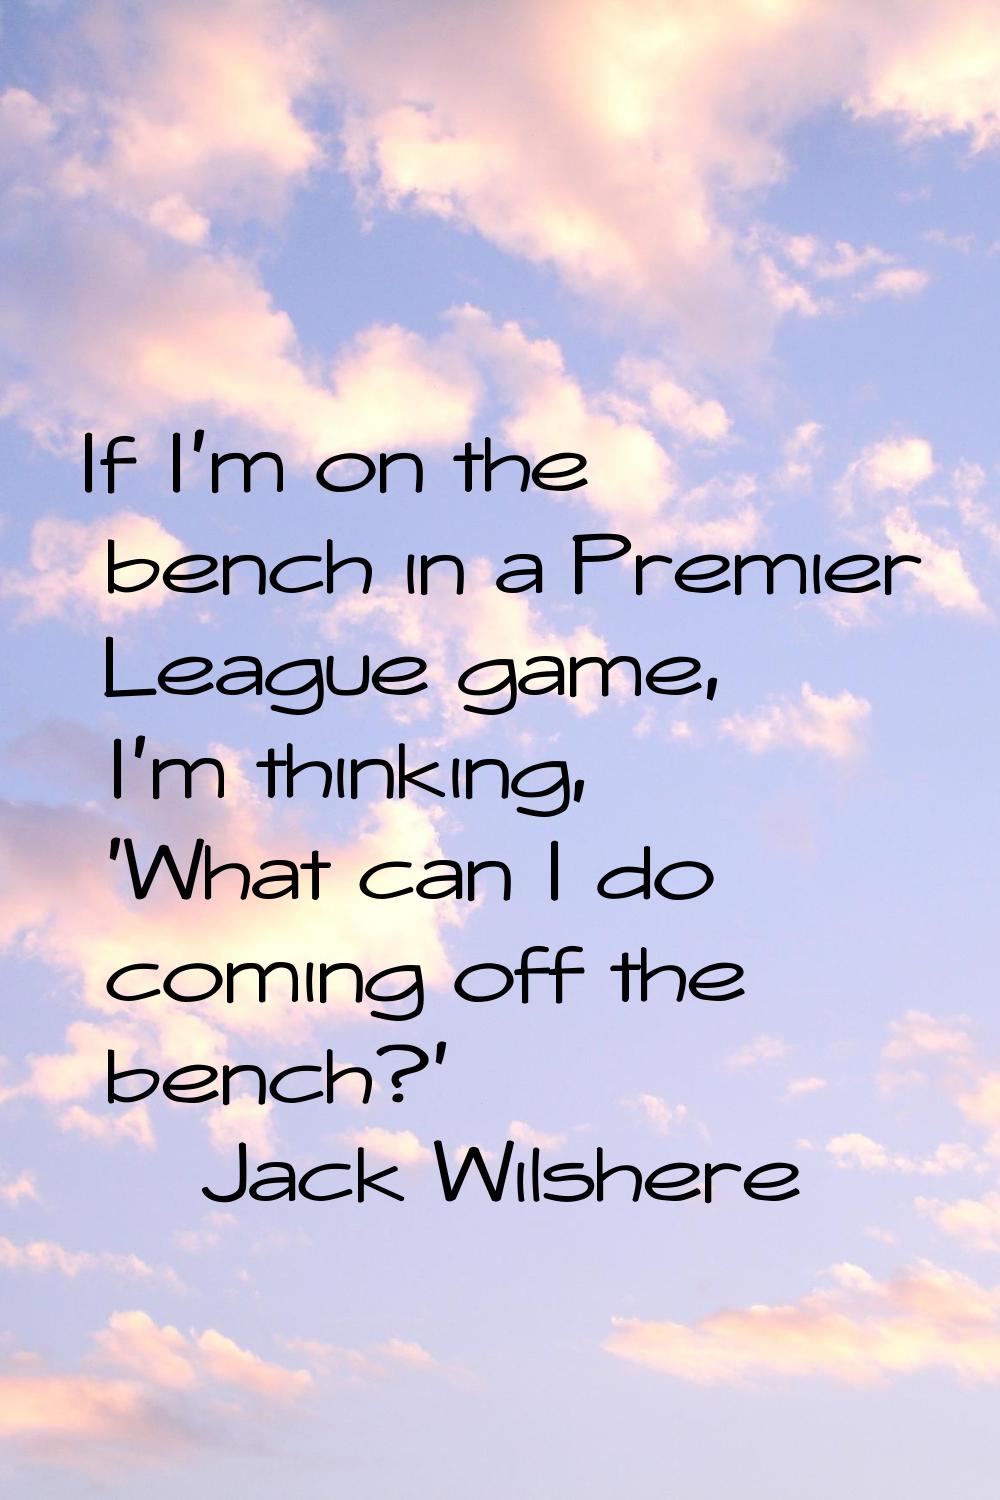 If I'm on the bench in a Premier League game, I'm thinking, 'What can I do coming off the bench?'